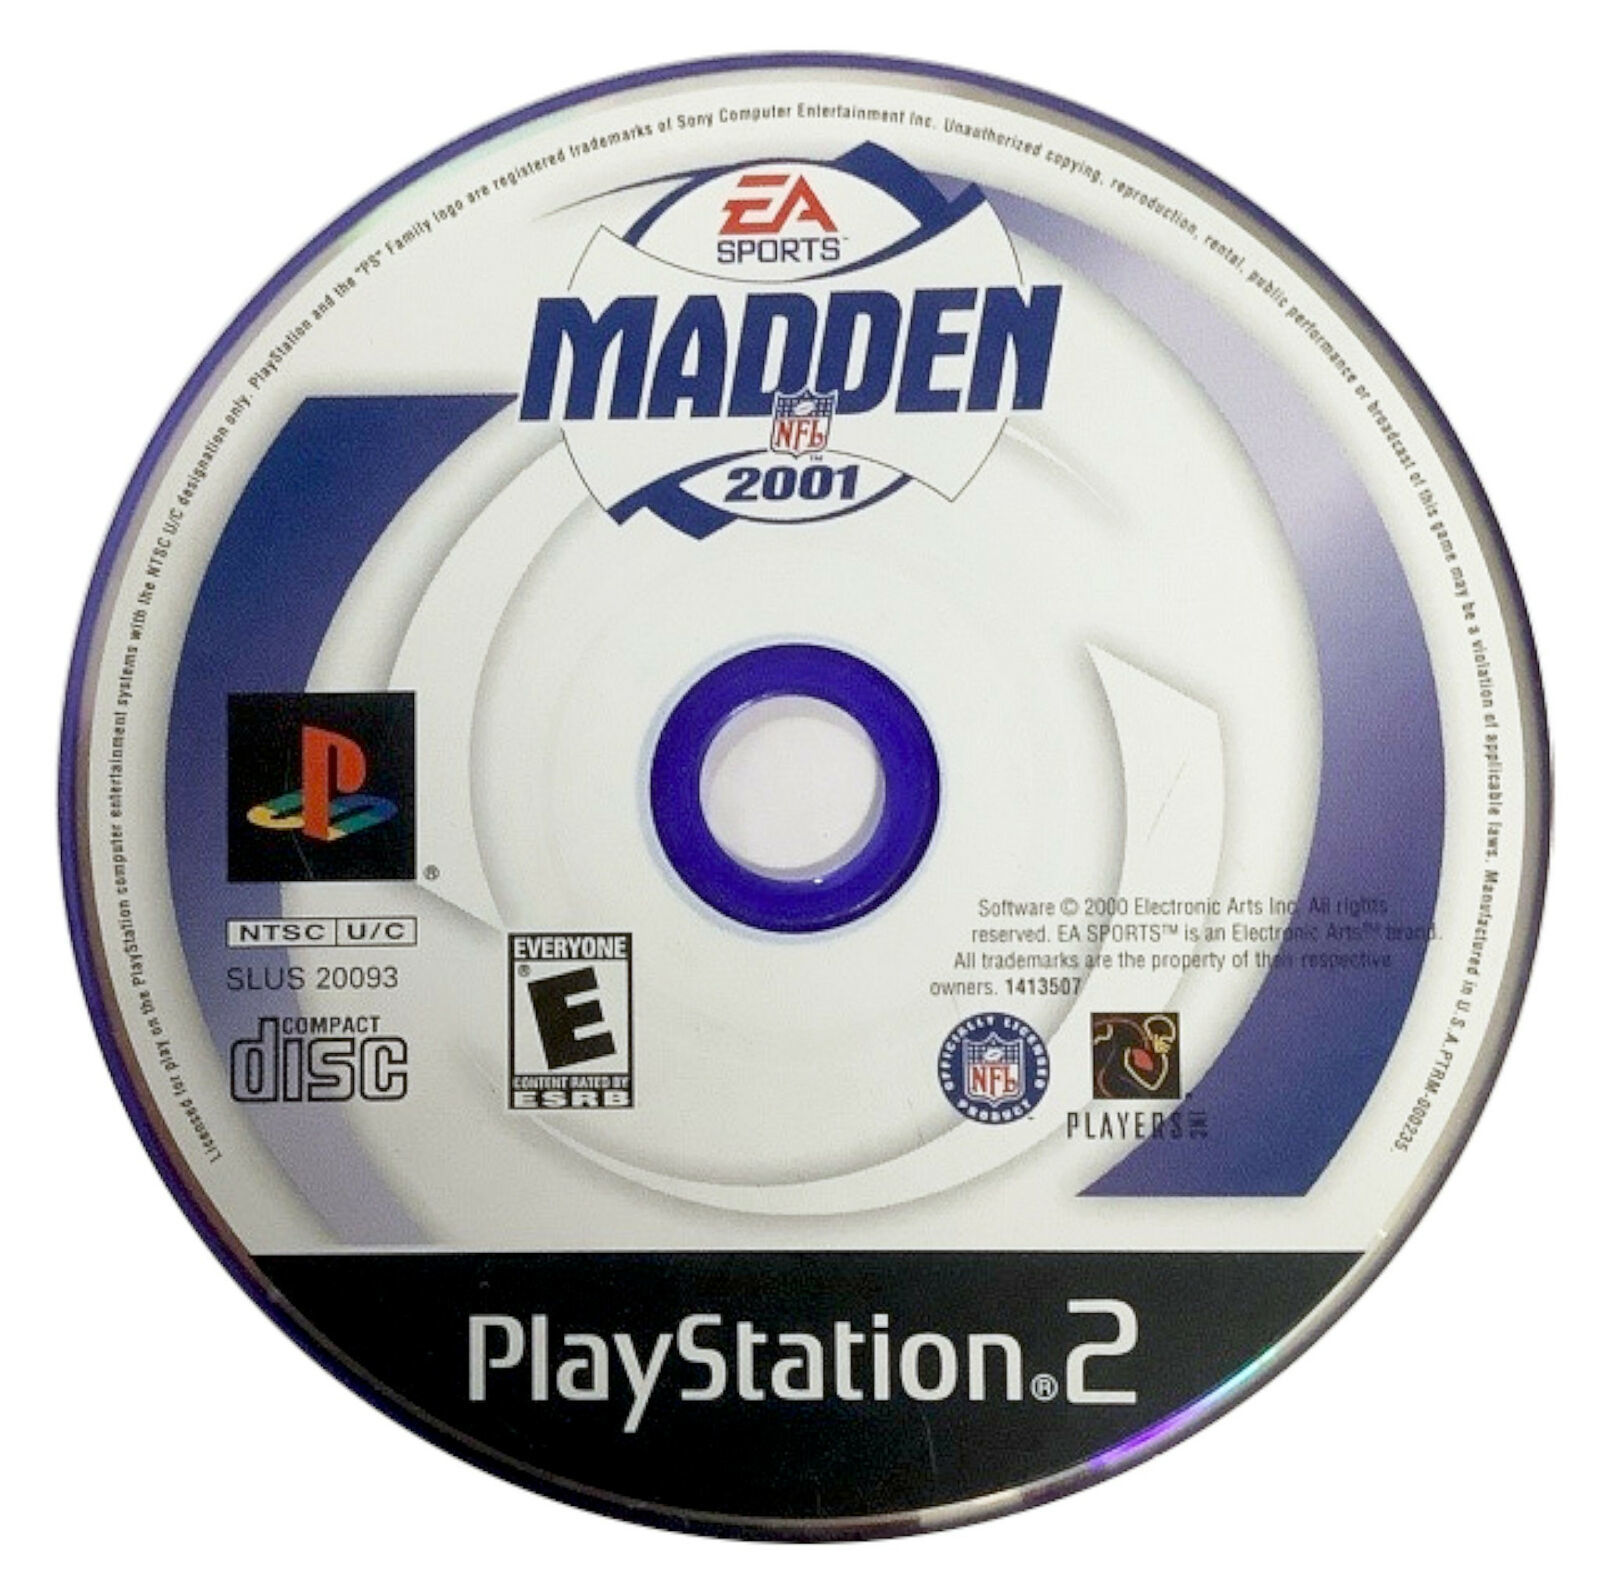 Primary image for Madden NFL 2001 Sony PlayStation 2 PS2 Video Game DISC ONLY EA Sports Football